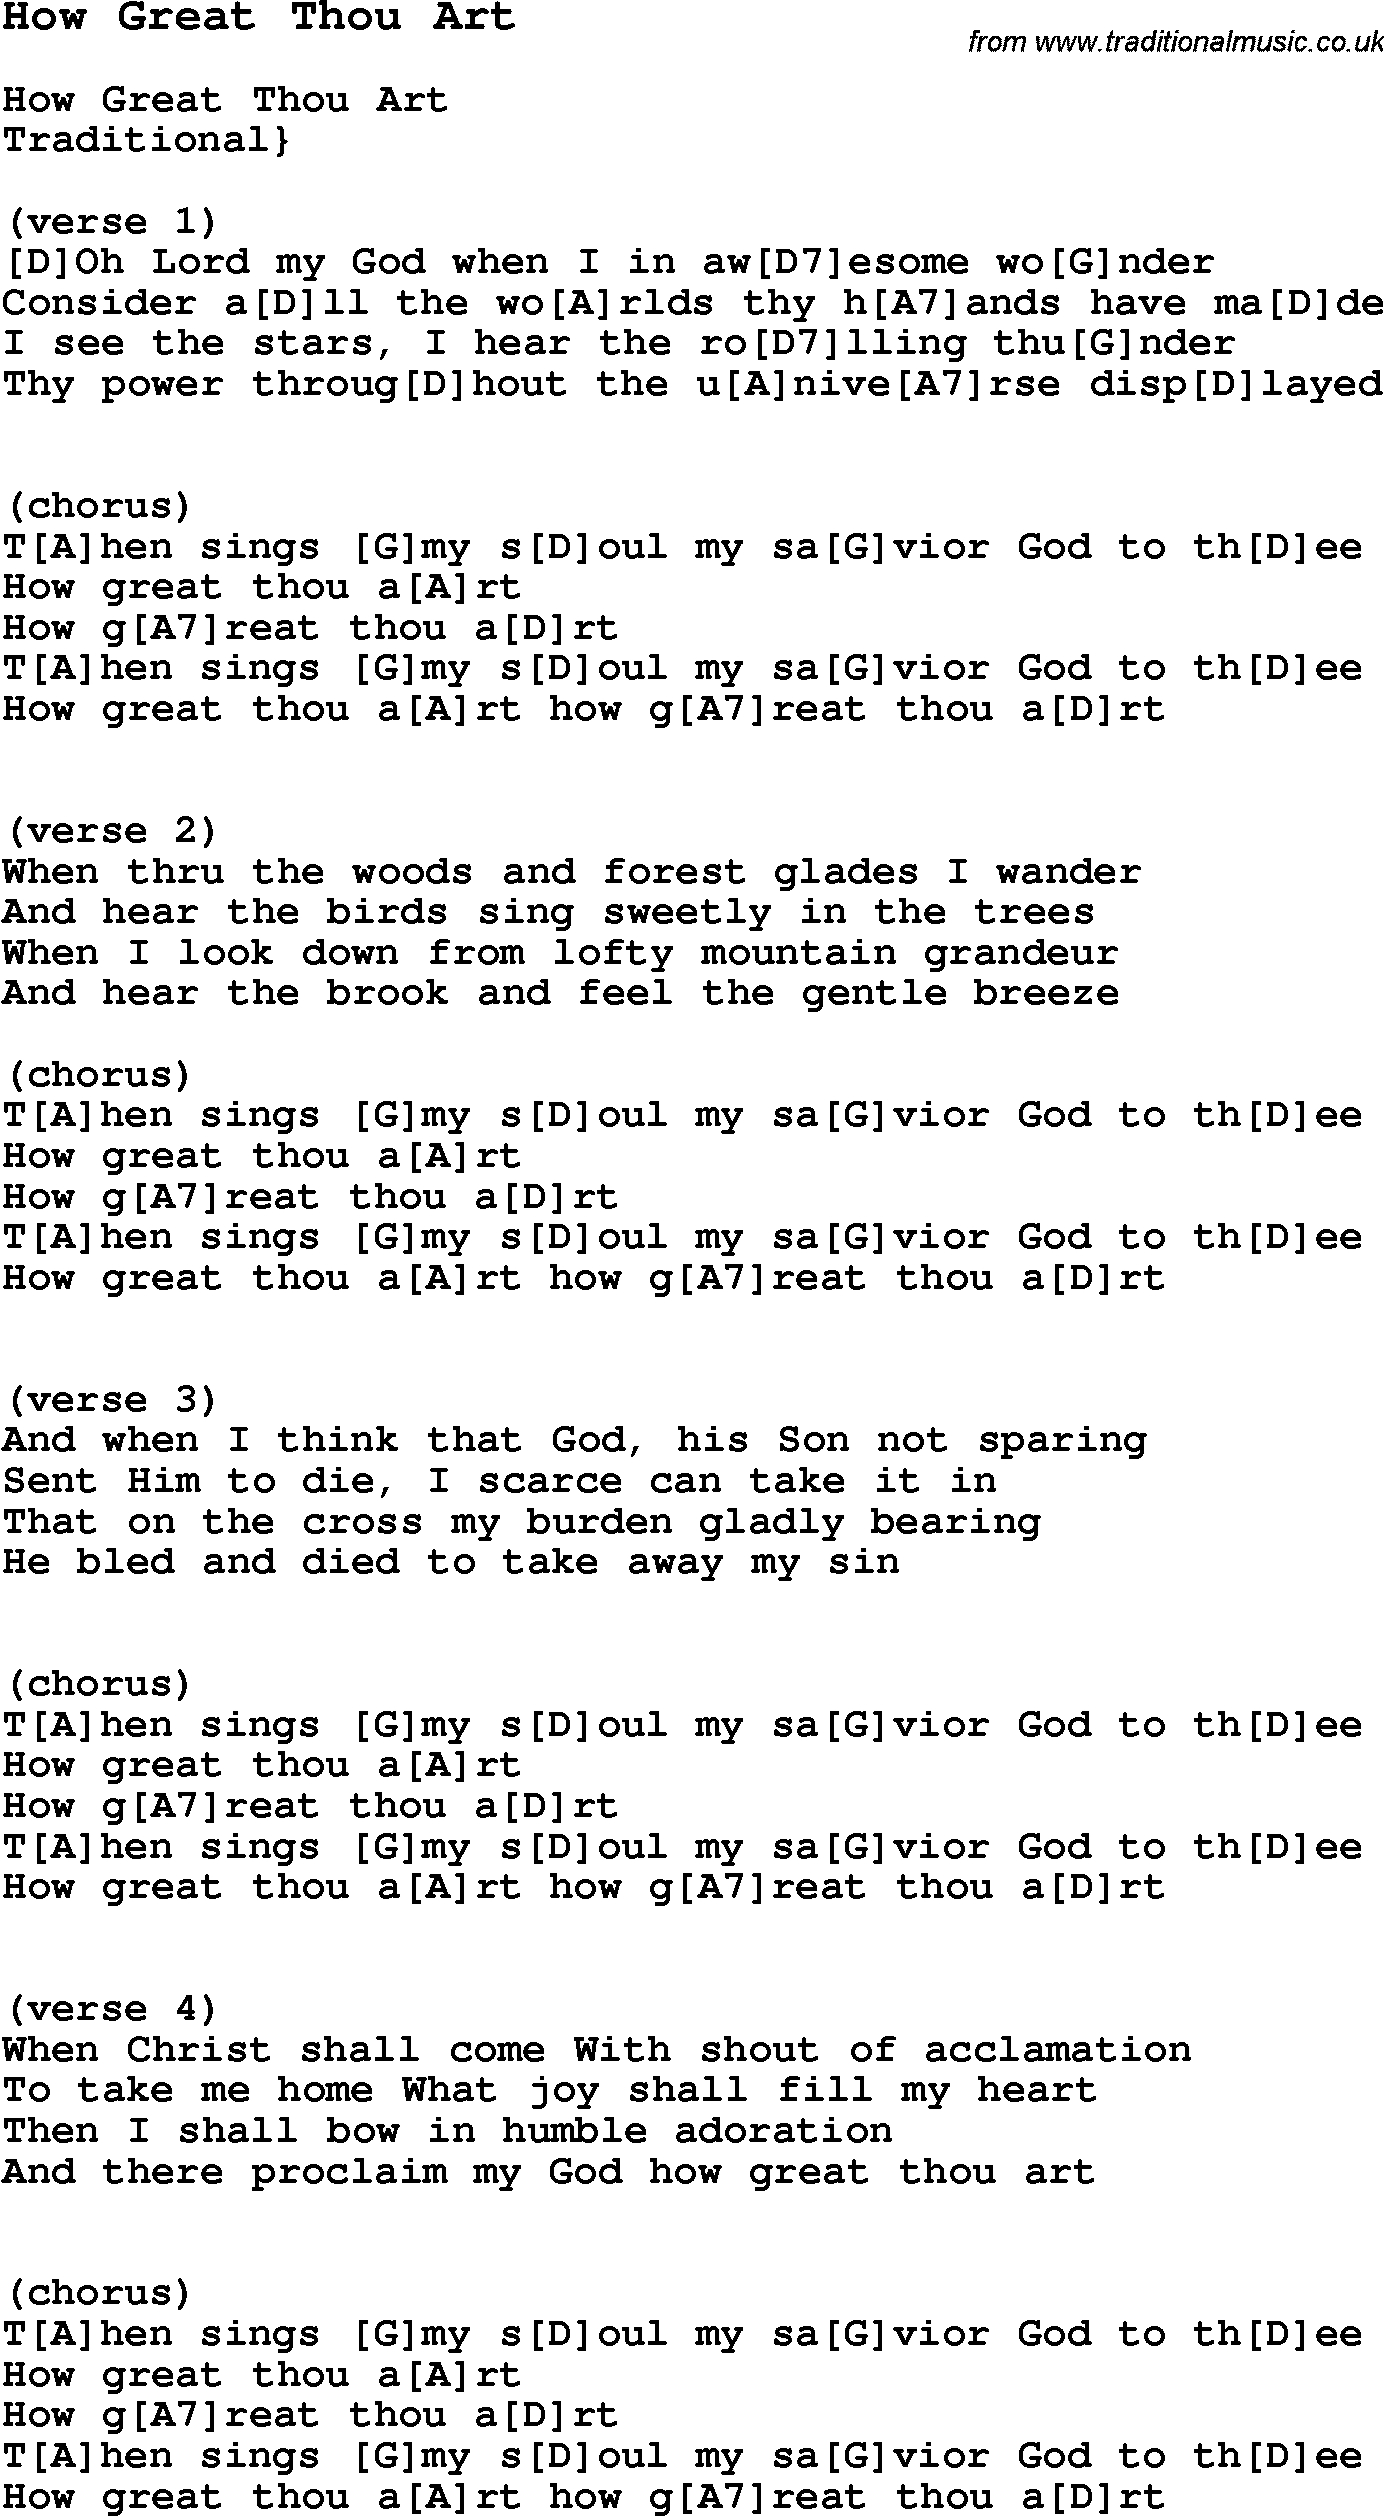 How Great Thou Art Chords Traditional Song How Great Thou Art With Chords Tabs And Lyrics